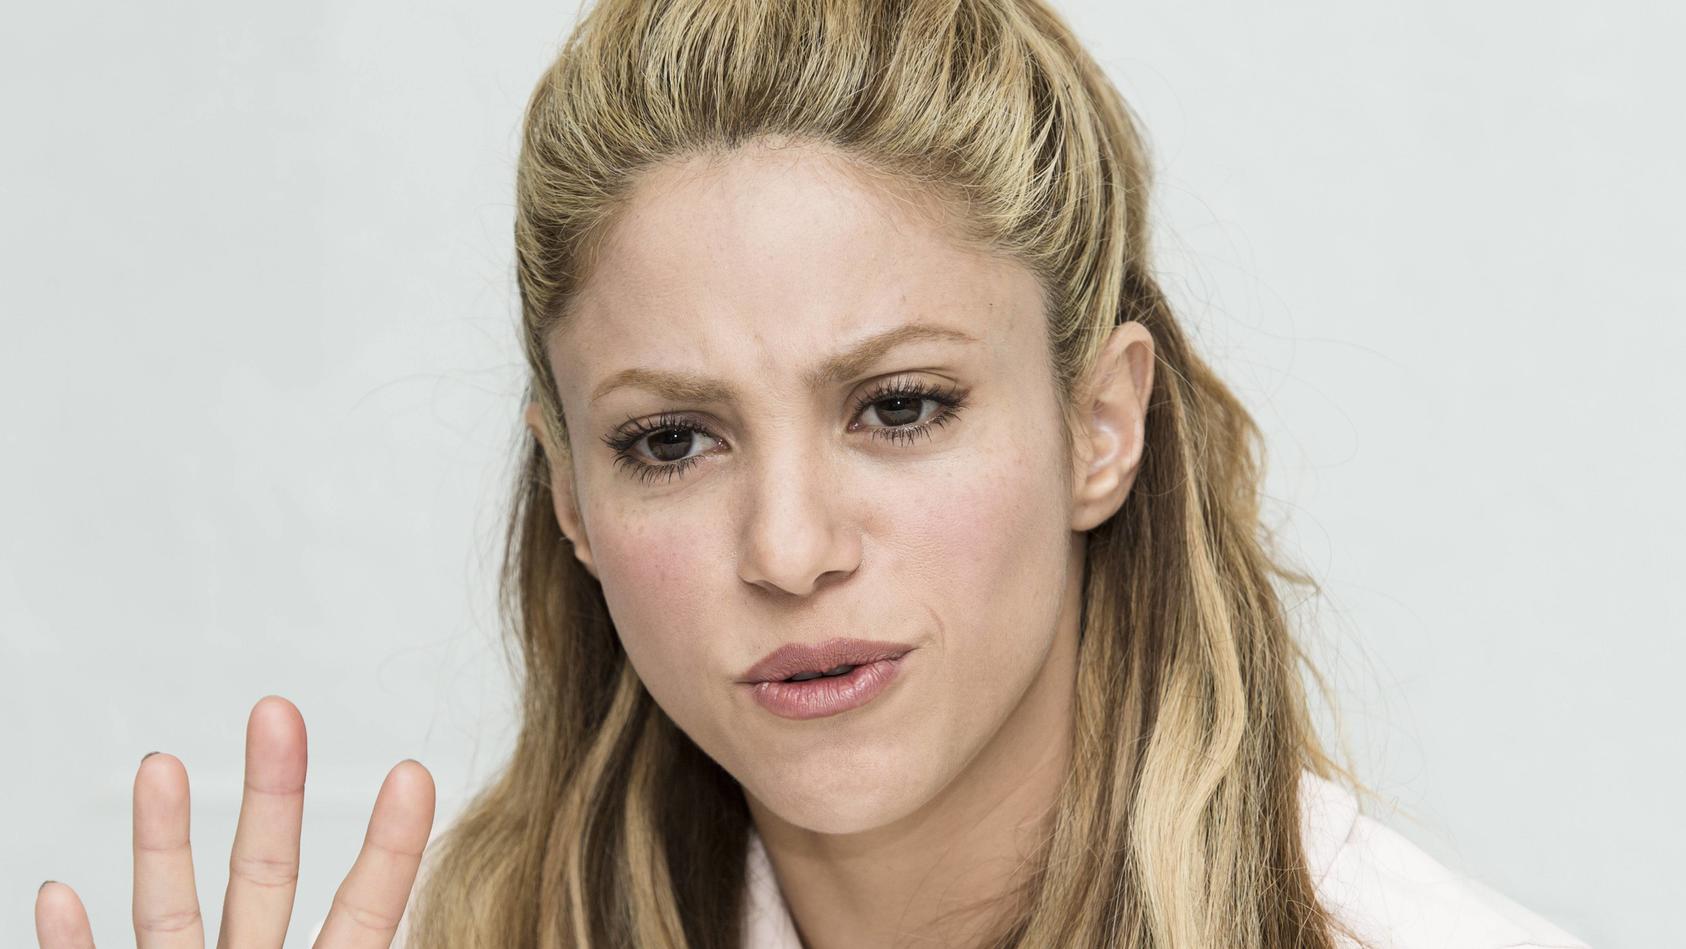 Feb. 17, 2016 - Hollywood, California - Portraits of Shakira during during an interview session in Hollywood for her latest movie Zootopia, where she sing Try Everything Hollywood PUBLICATIONxINxGERxSUIxAUTxONLY - ZUMAg203  